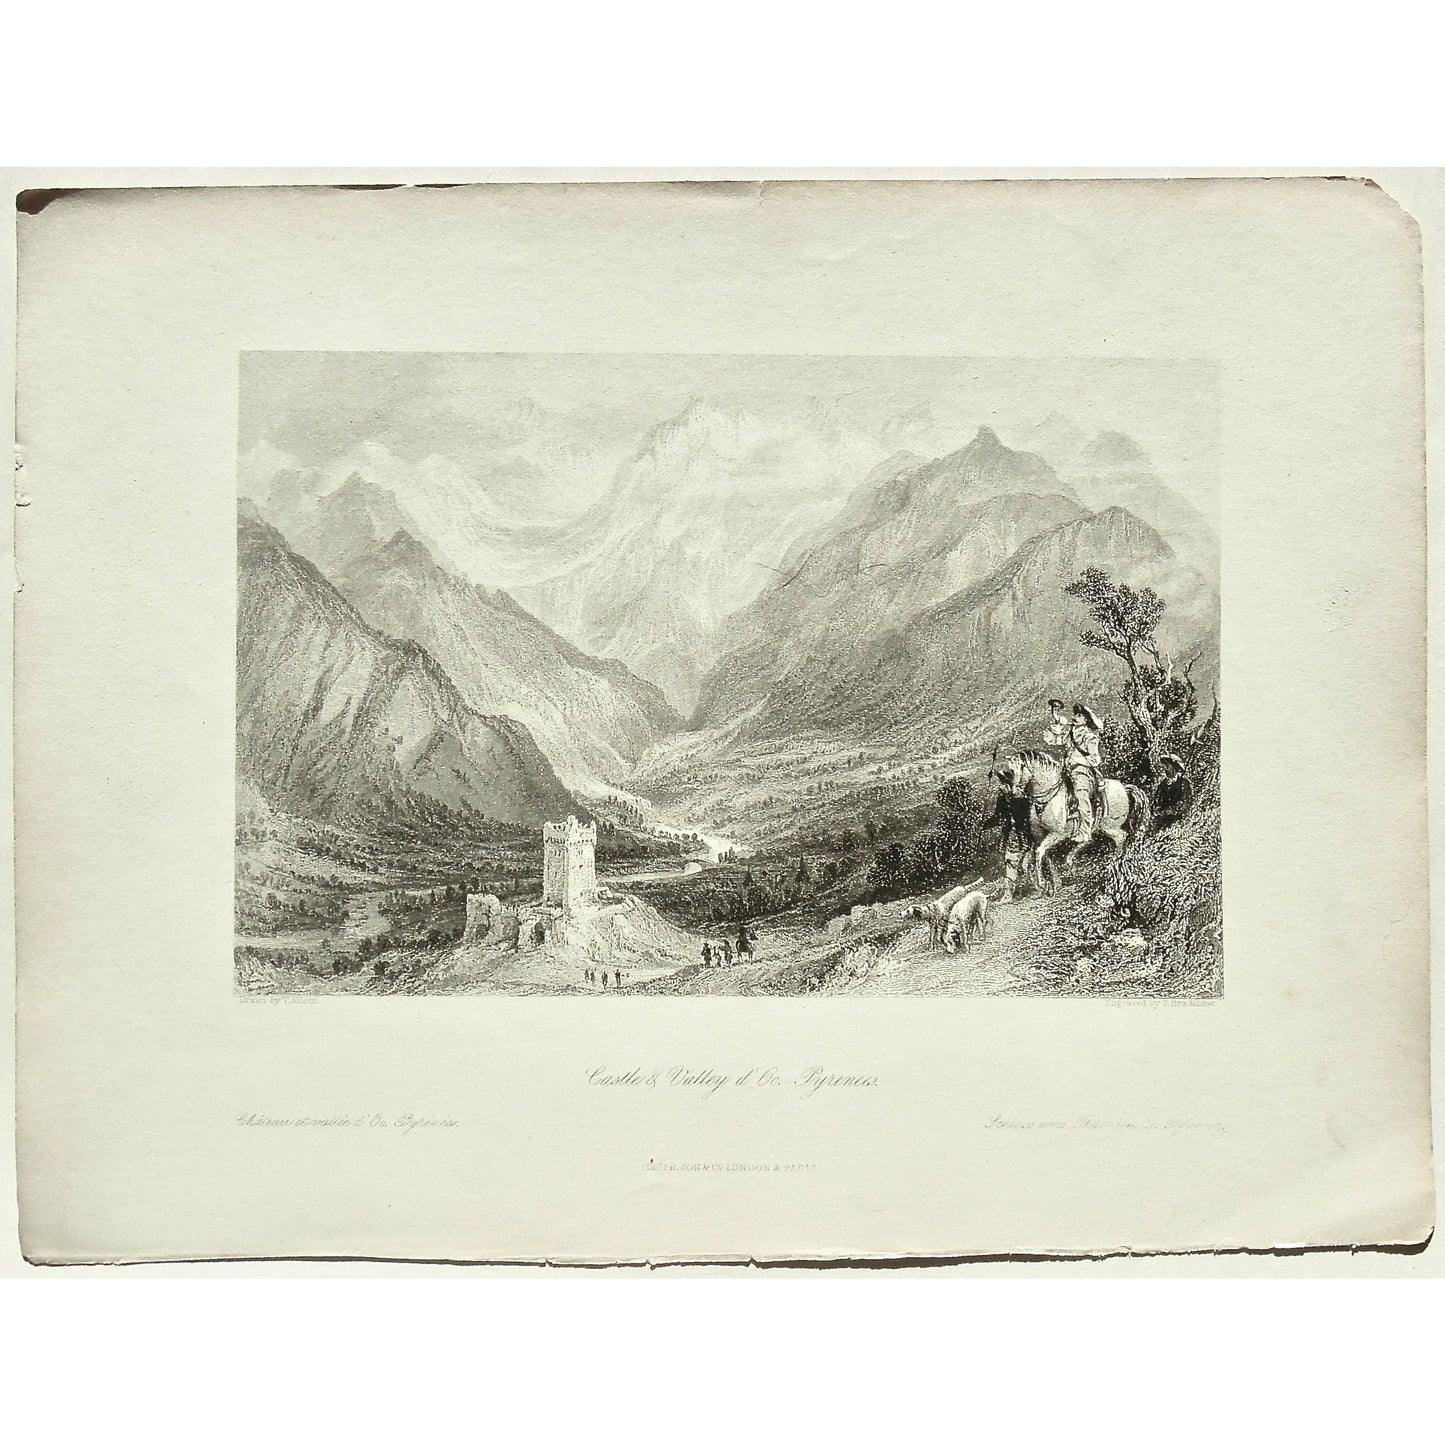 Castle, castles, Castle d'Oo, Valley, Valley D'Oo, d'Oo, Château, Vallée, Pyrenees, Schloss, Thal, Mountains, Pyrenees mountains, Tower, Horse, Horses, Dog, Dogs, Horn, fox horn, fox hunting, fox hunting horn, blowing a horn, hunting, horseback, France, France Illustrated, Exhibiting its Landscape Scenery, Antiquities, Military and Ecclesiastical Architecture, Thomas Allom, Allom, Fisher, Son & Co., London, Paris, Reverend George Newenham, Newenham, Caxton Press, Angel St., Martin's-Le-Grand, Mandeville, 